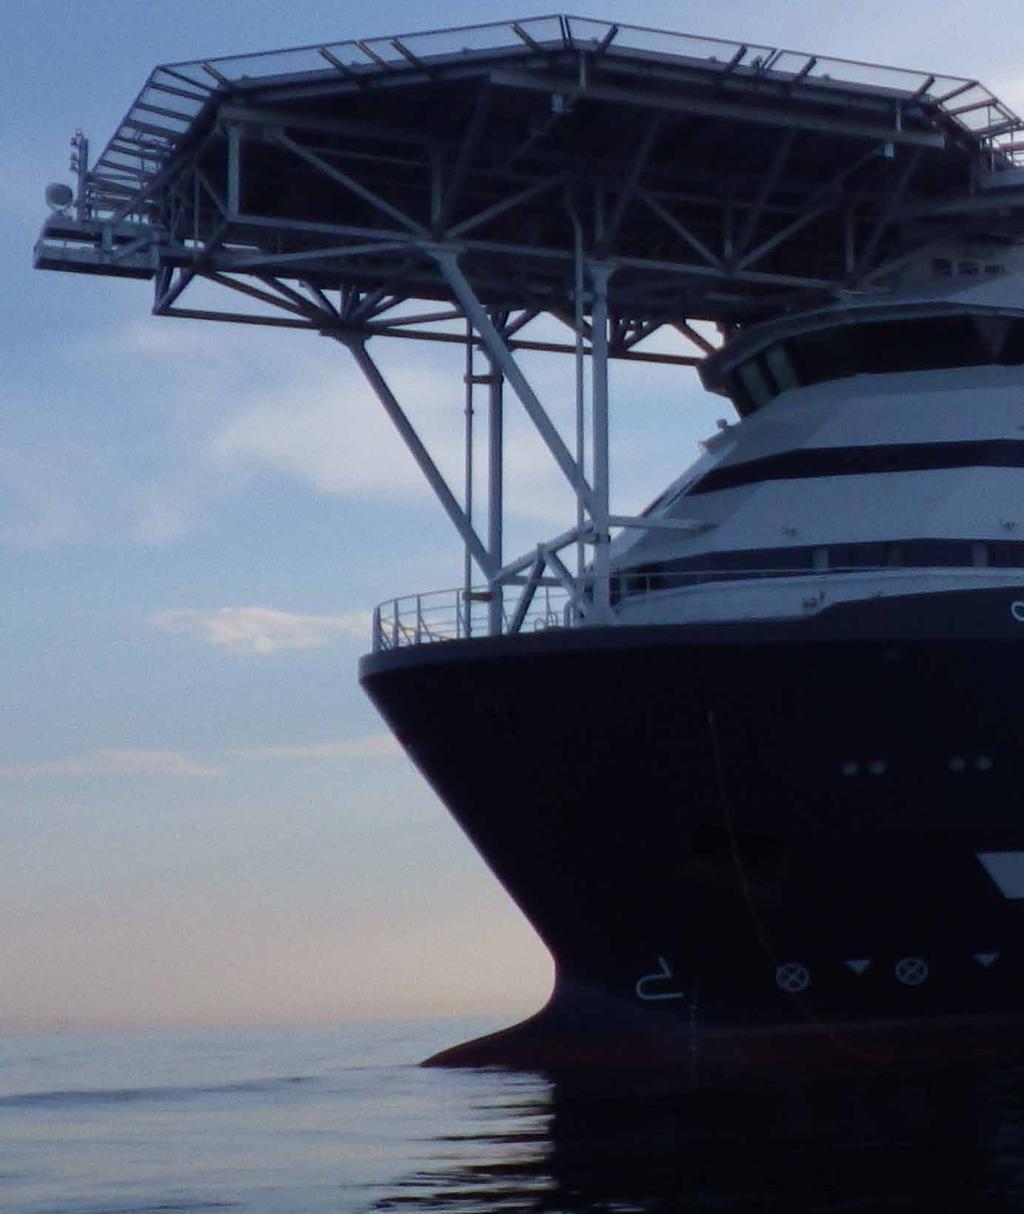 construction vessel designed to meet general offshore market requirements, with diesel-electric